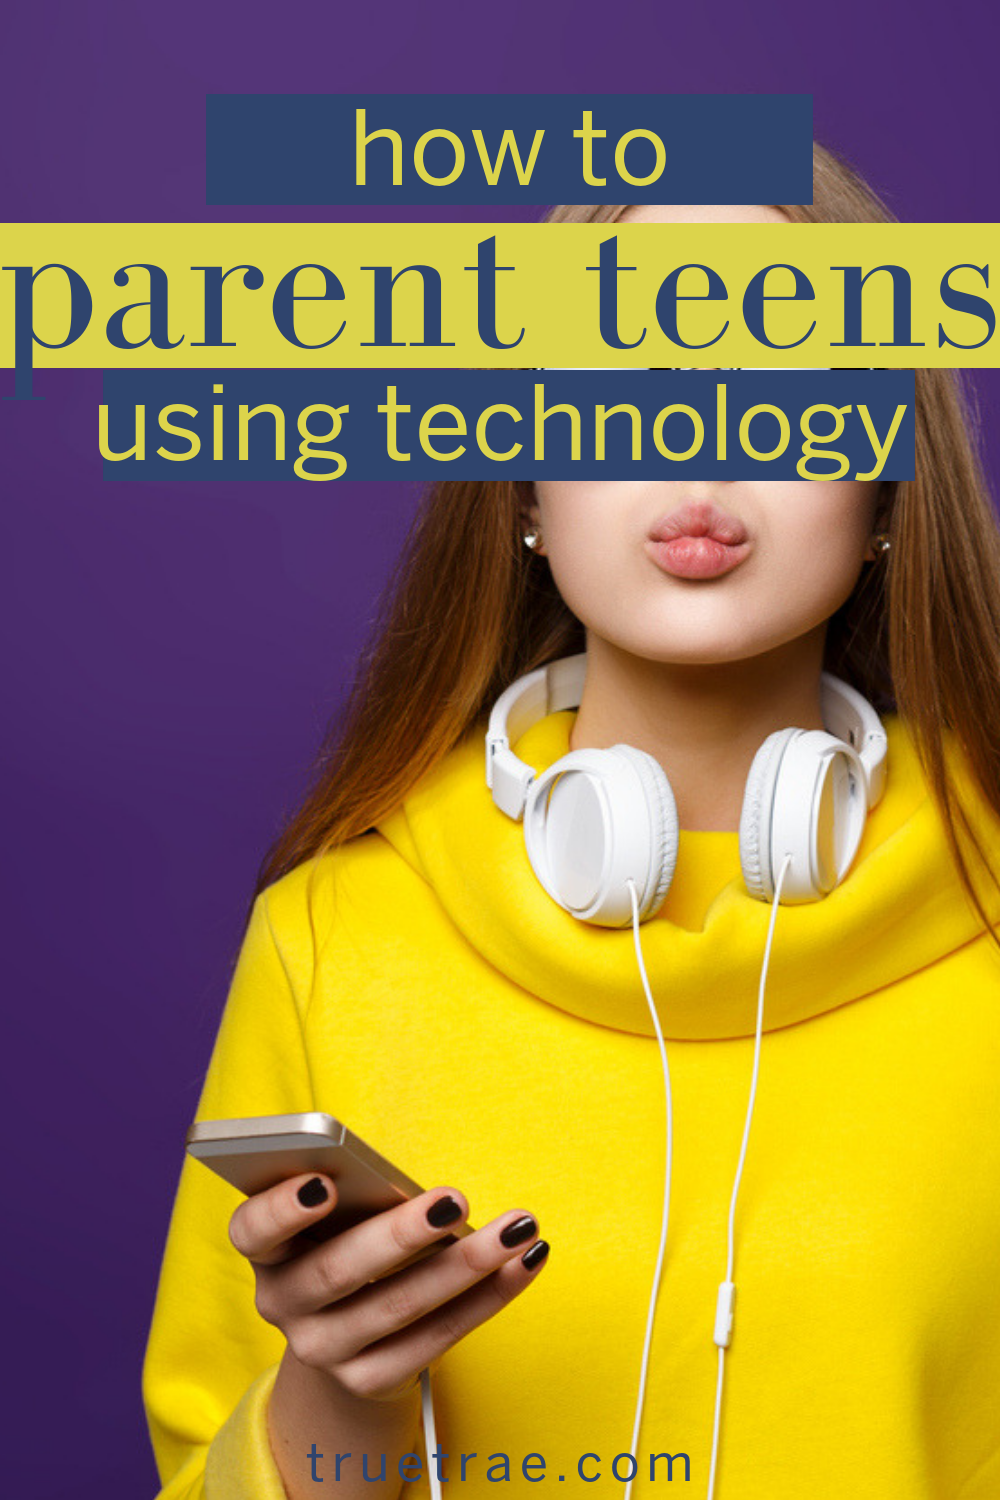 Did you know that raising teenagers can be made easier by using technology? These tips for parenting teens are all about technology and teens to teach life skills. Teach your teens to use technology to be successful people. #teens #teenagers #parenting #parentingtips #teentips #teenhealth